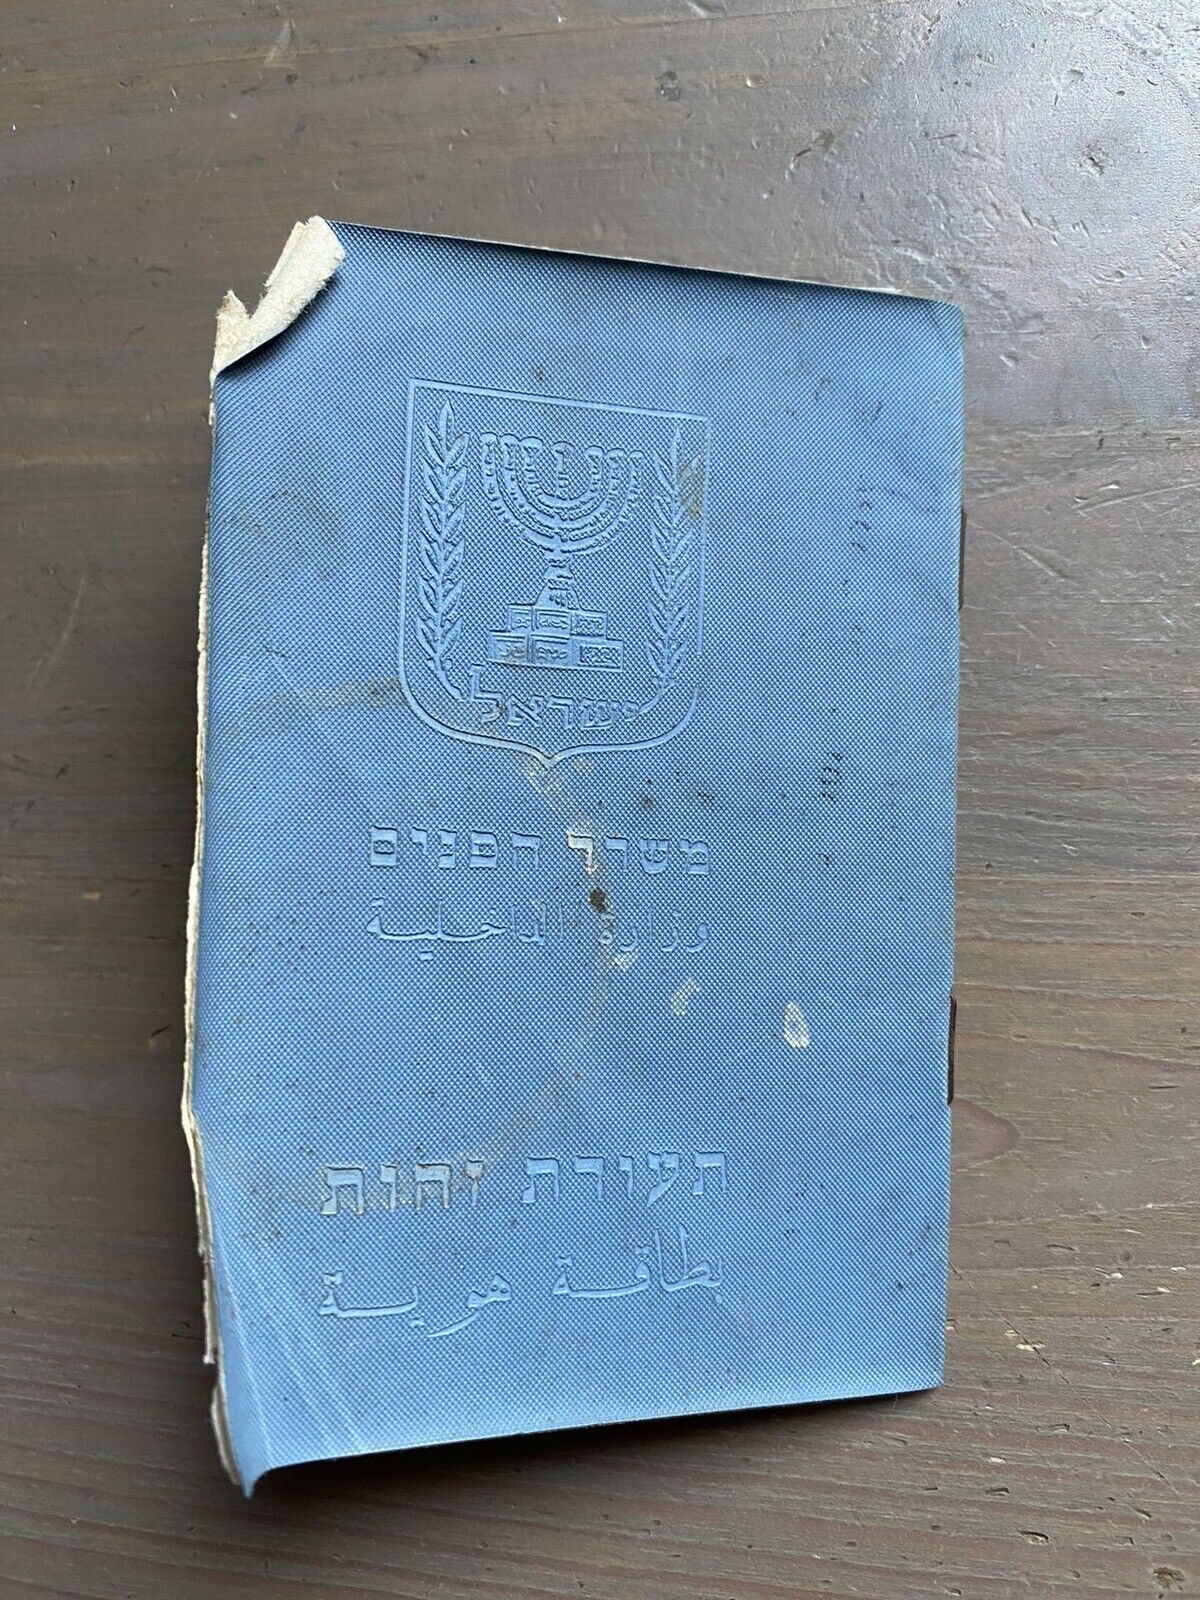 Old Israel ID Card Document With Photo 1980’s Cancelled